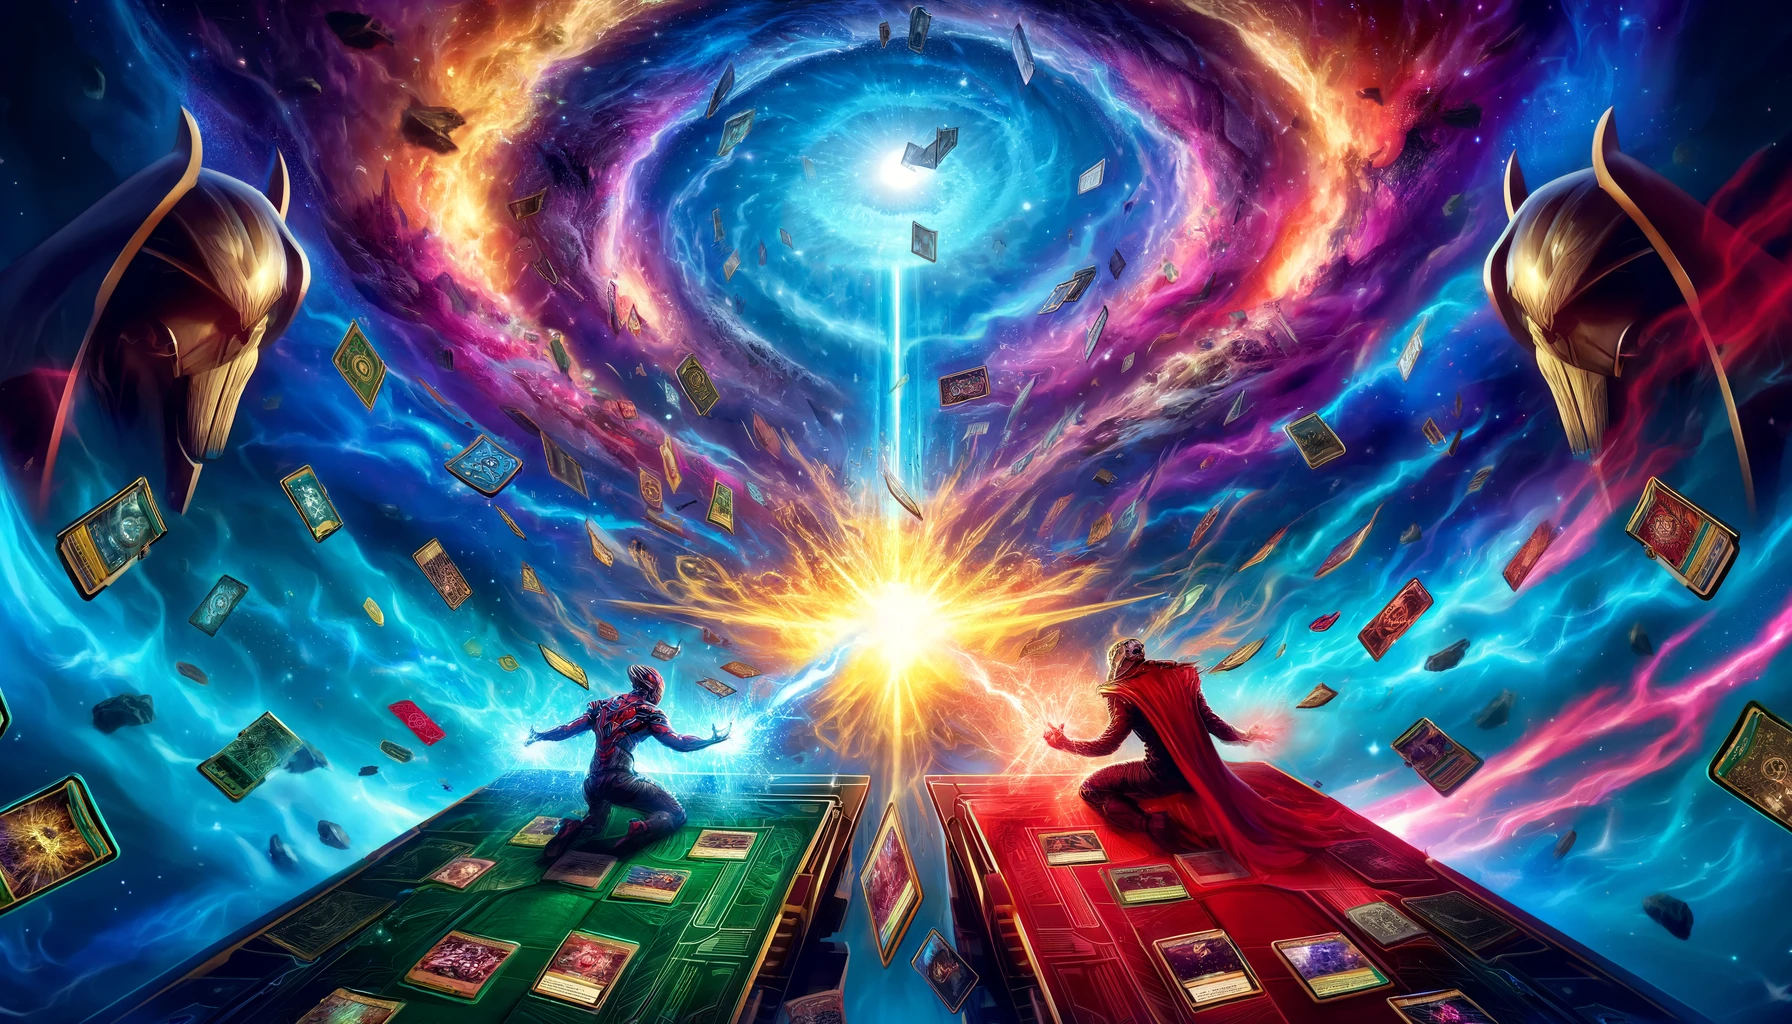 An intense and dynamic illustration of a Marvel Snap match set in a fantastical, otherworldly arena. Two players are depicted in the midst of a strategic battle, with cards swirling around them, emitting bursts of energy. The surreal, cosmic background adds to the high stakes and drama of the game, filled with vibrant colors and energy patterns, capturing the pivotal moment of the match.